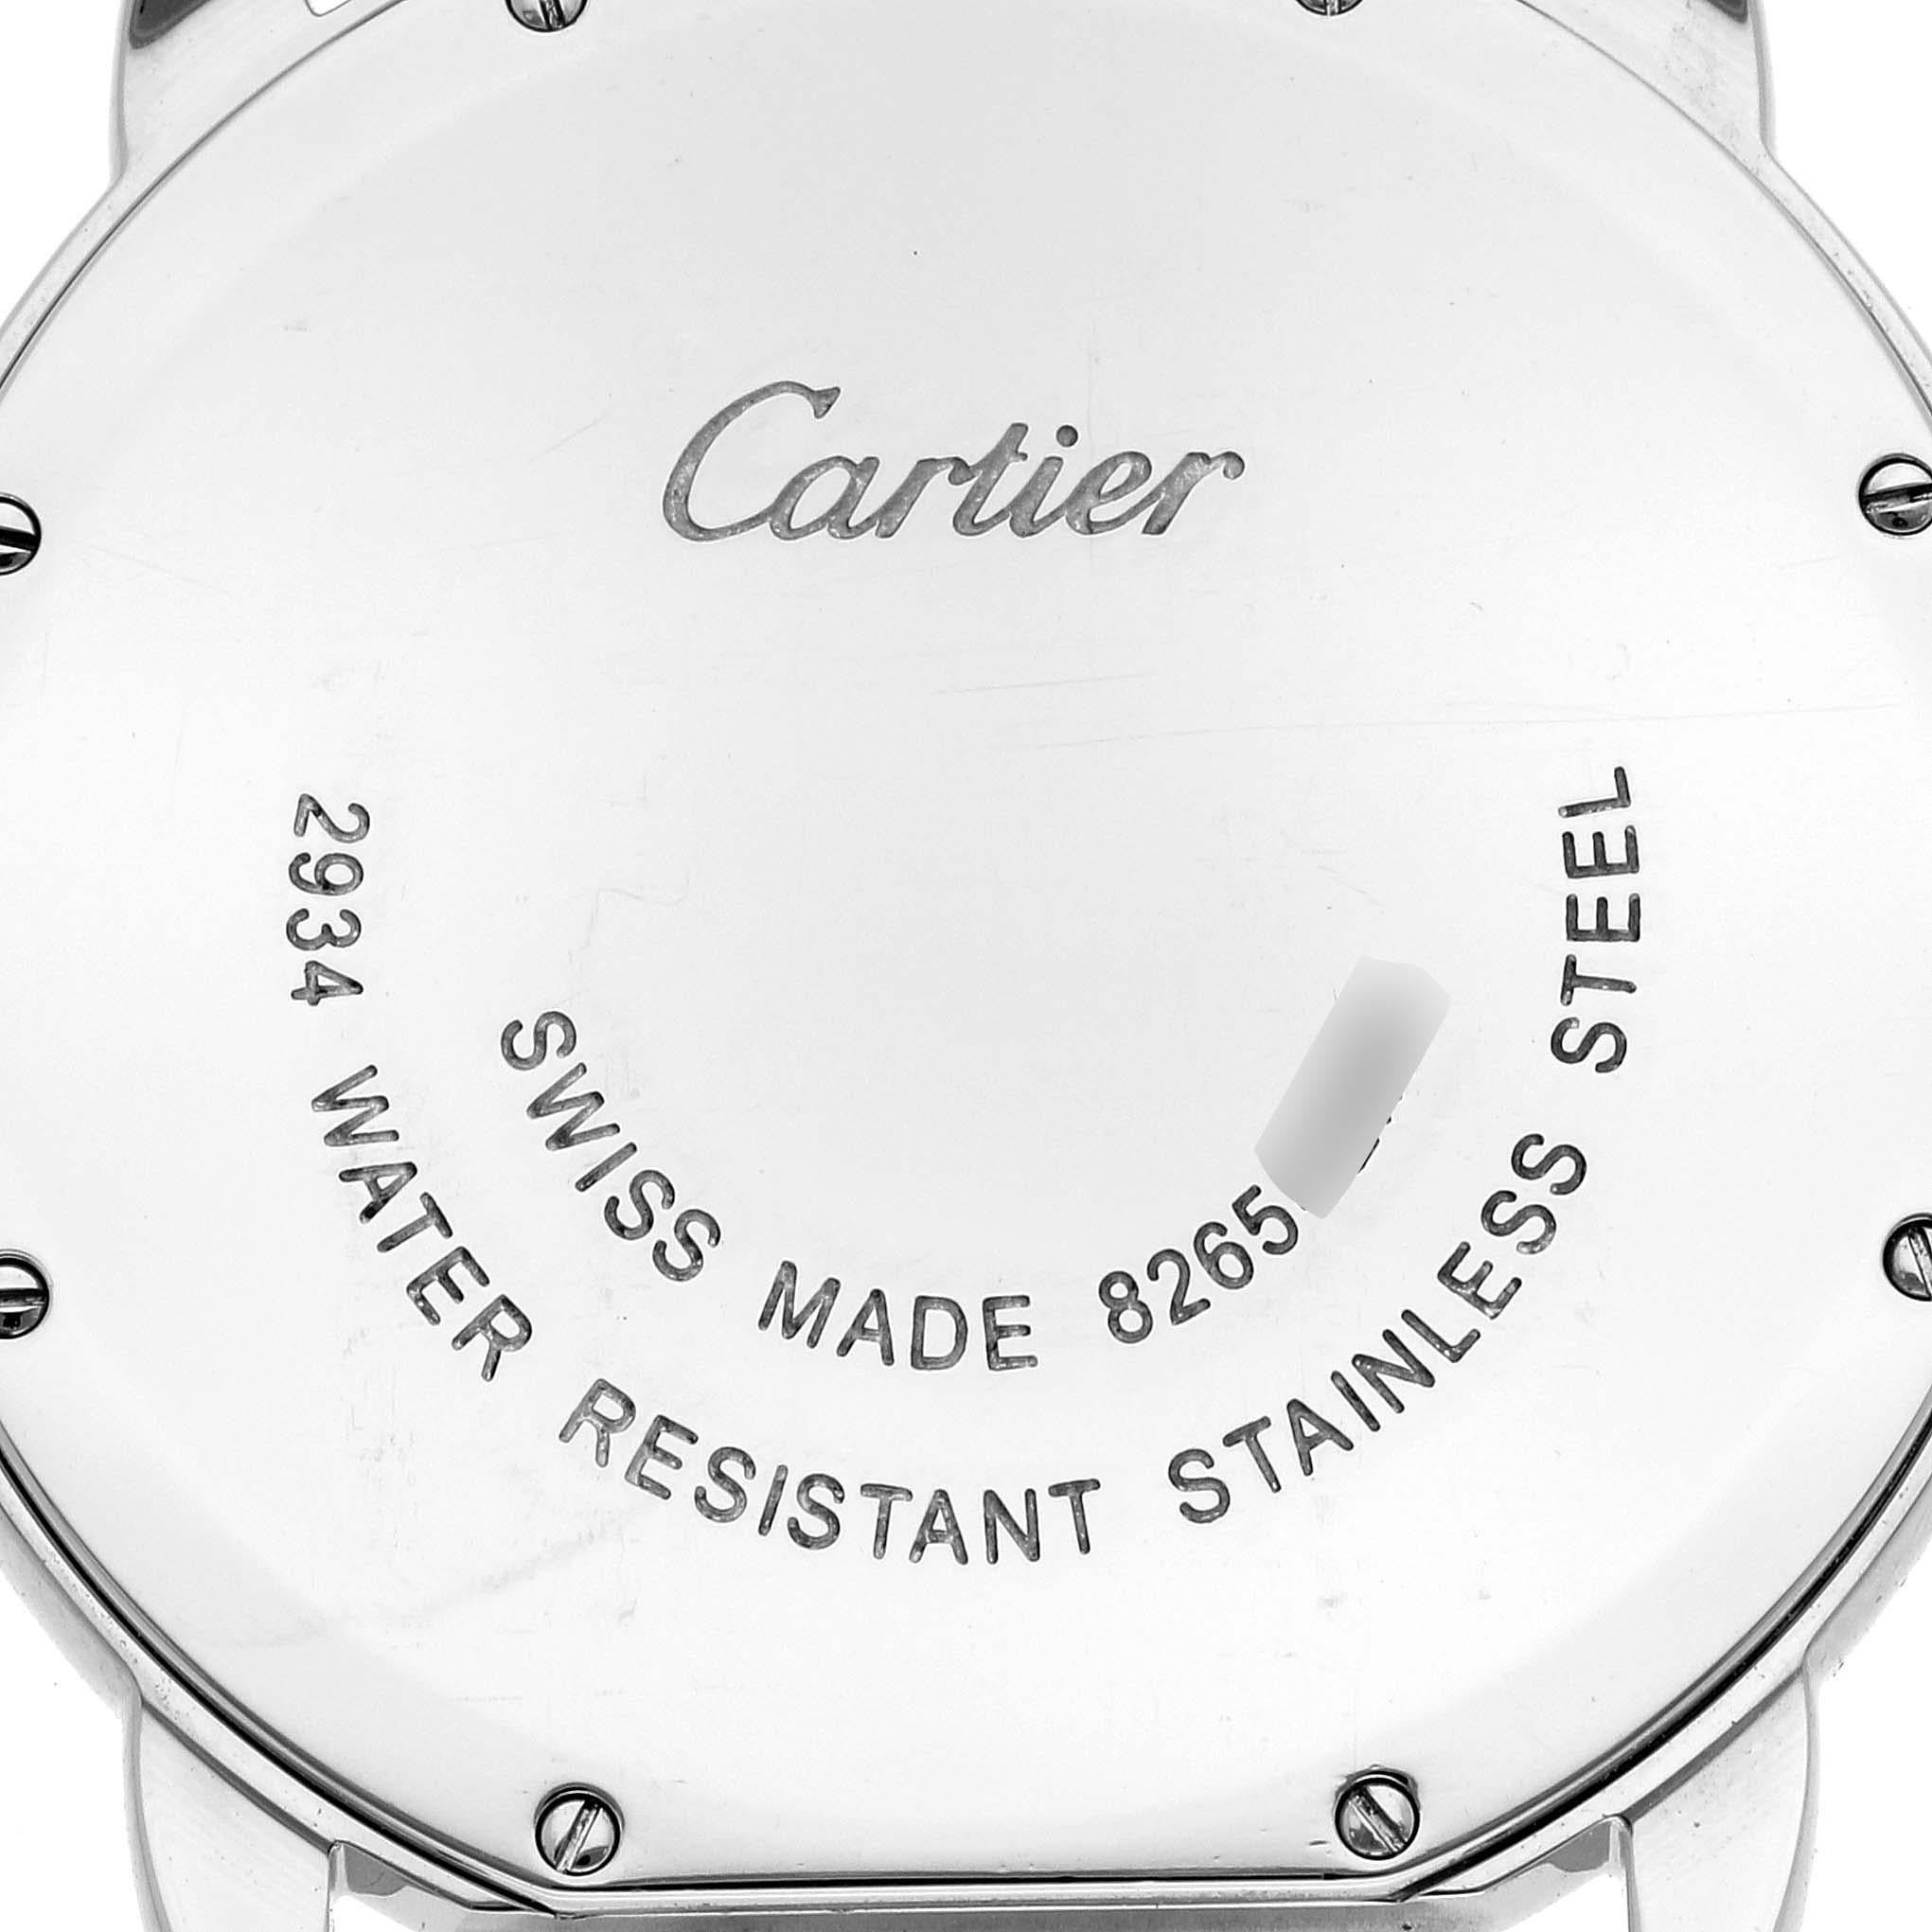 Cartier Ronde Solo Large 36mm Steel Mens Watch W6701005 Papers. Quartz movement. Stainless steel case 36.0 mm in diameter. Circular grained crown set with blue spinel cabochon. . Scratch resistant sapphire crystal. Silvered opaline dial with black